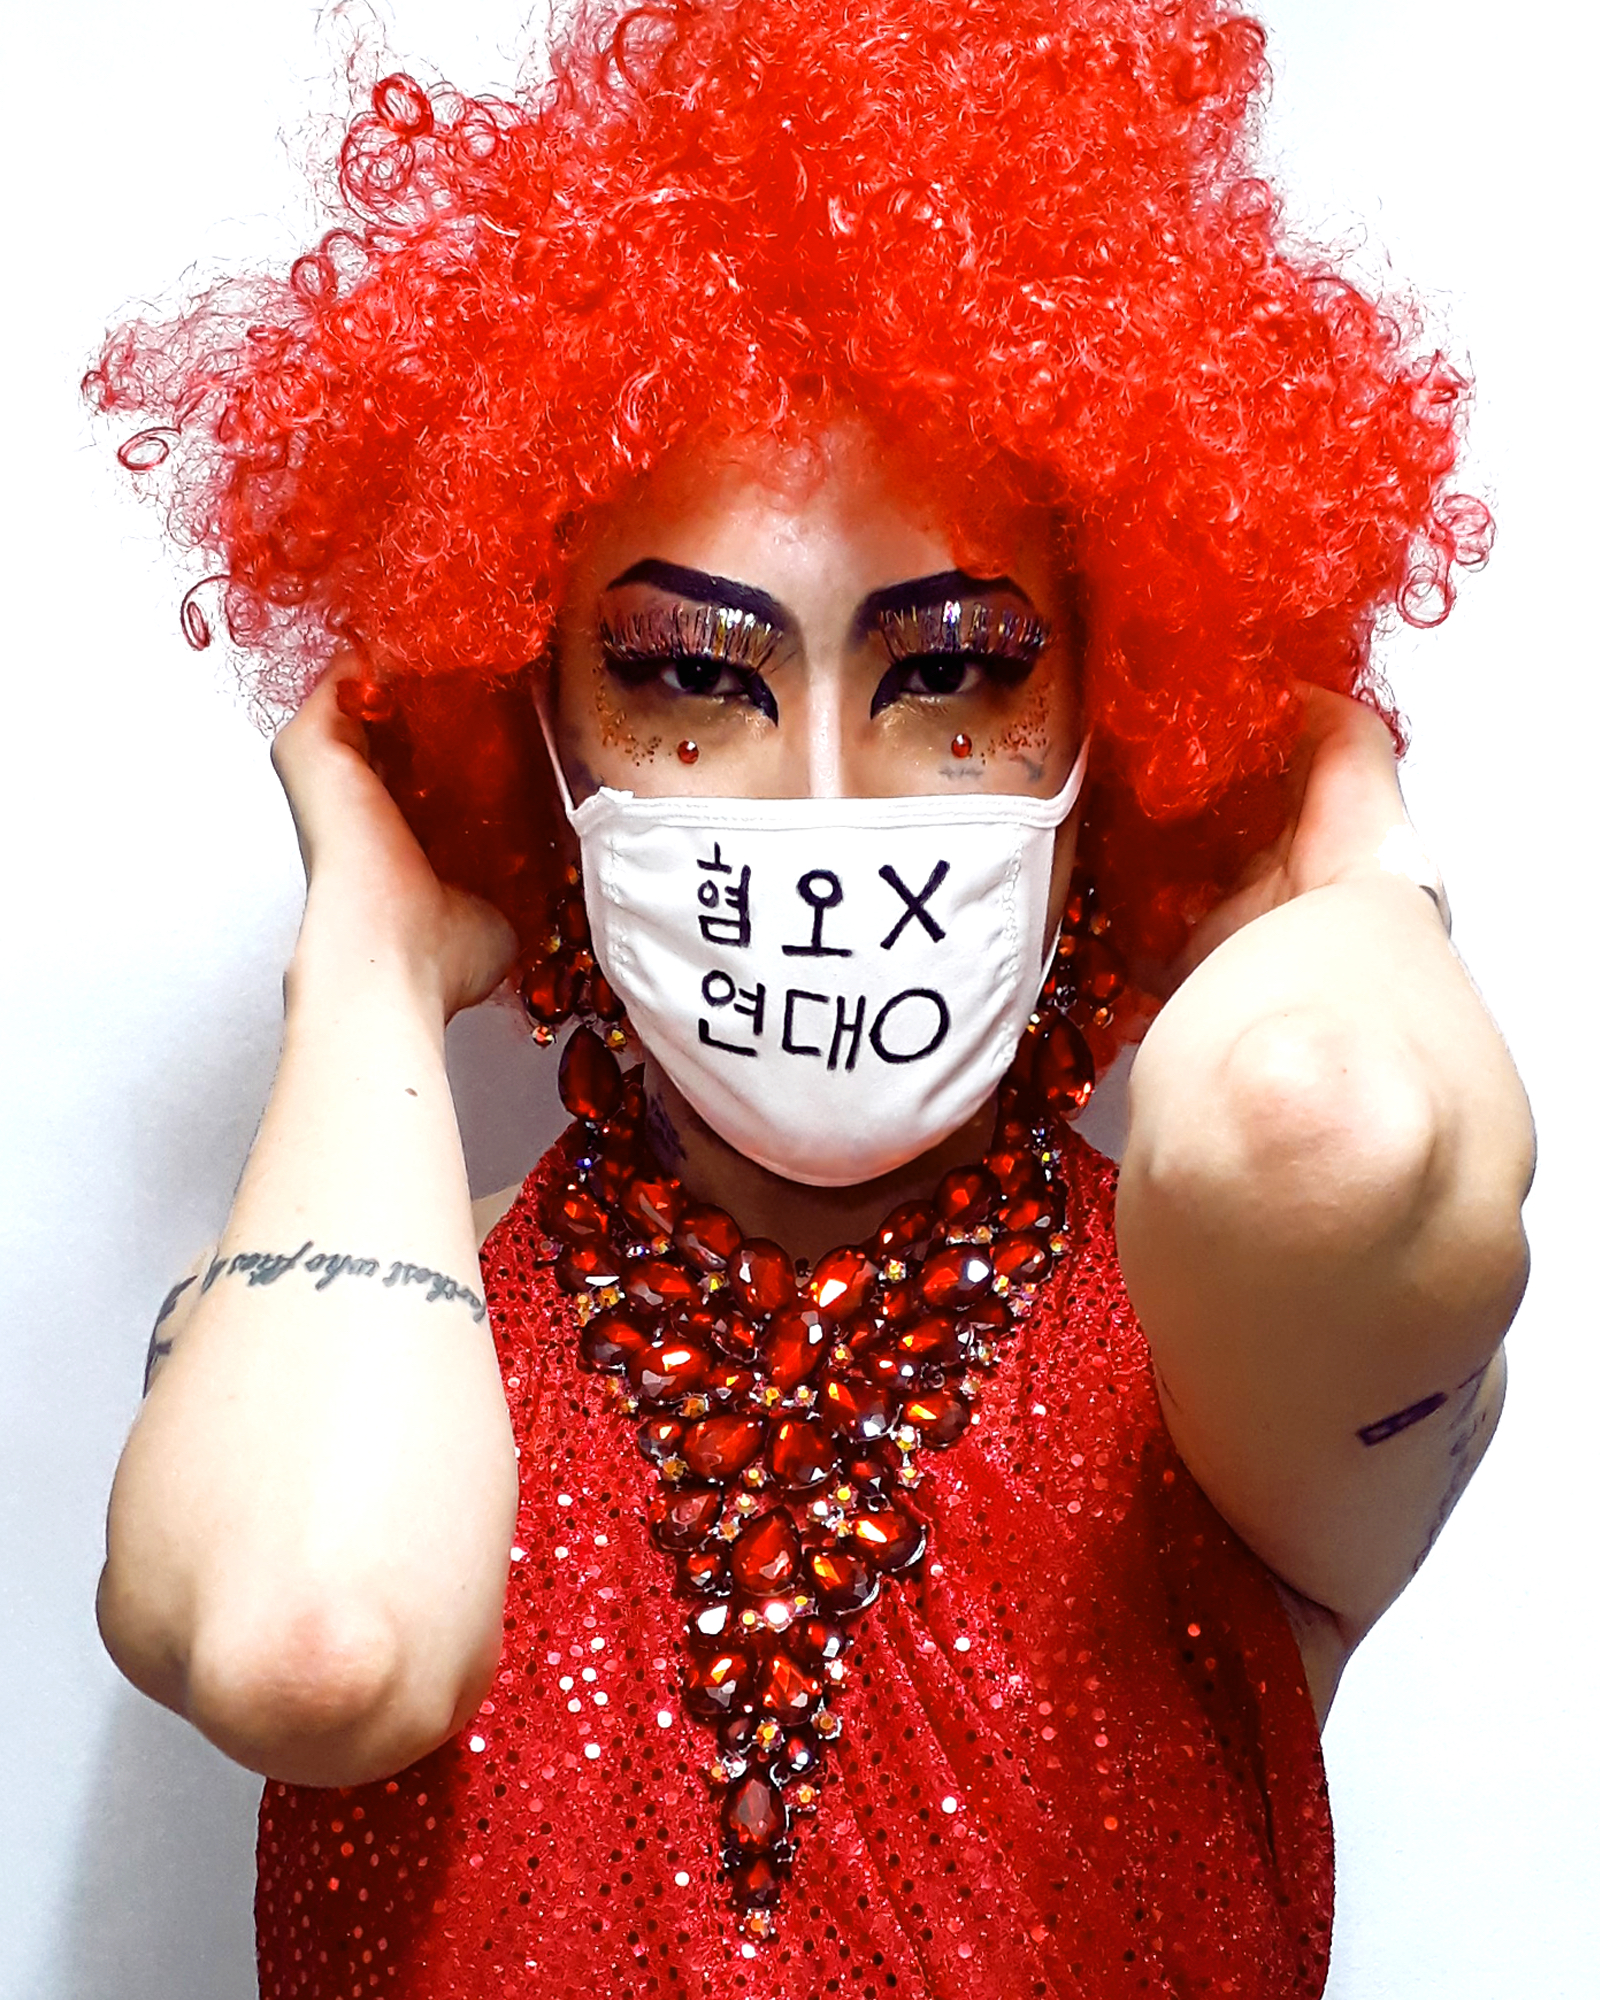 Artist and drag performer Heezy Yang poses in a photo he posted to social media following the Itaewon coronavirus outbreak. The message on his mask translates roughly: 